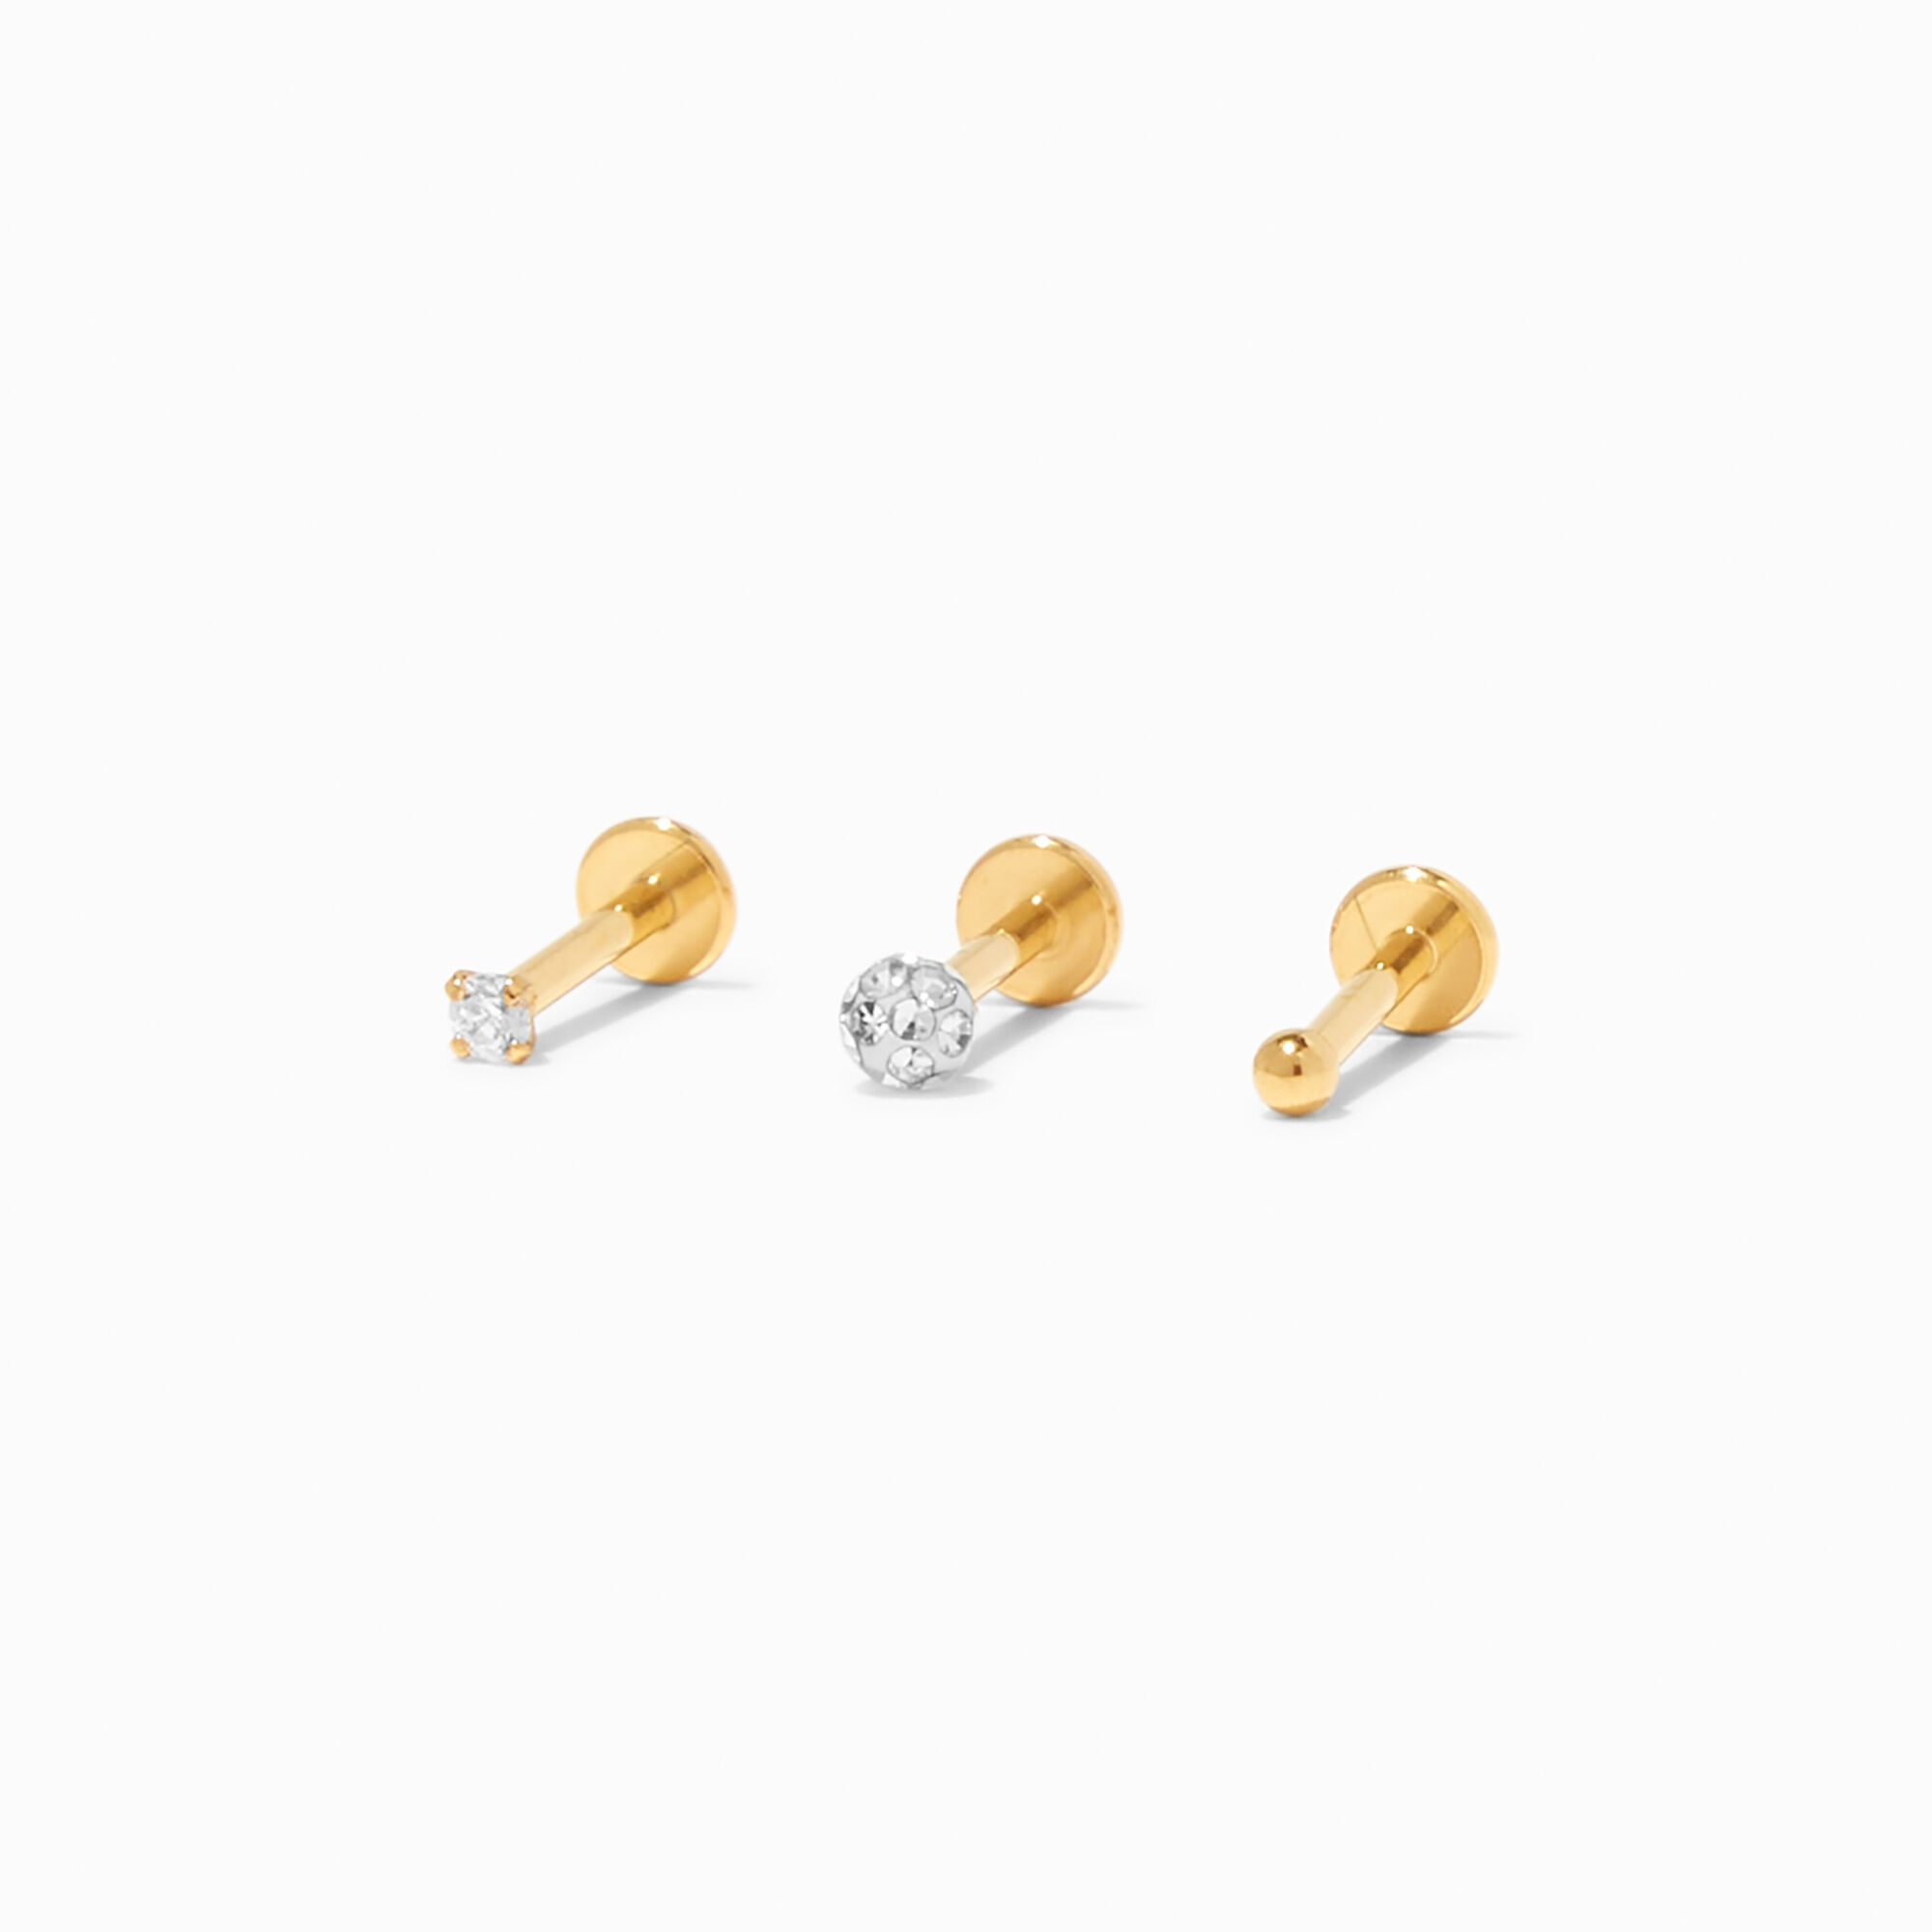 View Claires Tone 16G Crystal Fireball Labret Lip Studs 3 Pack Gold information